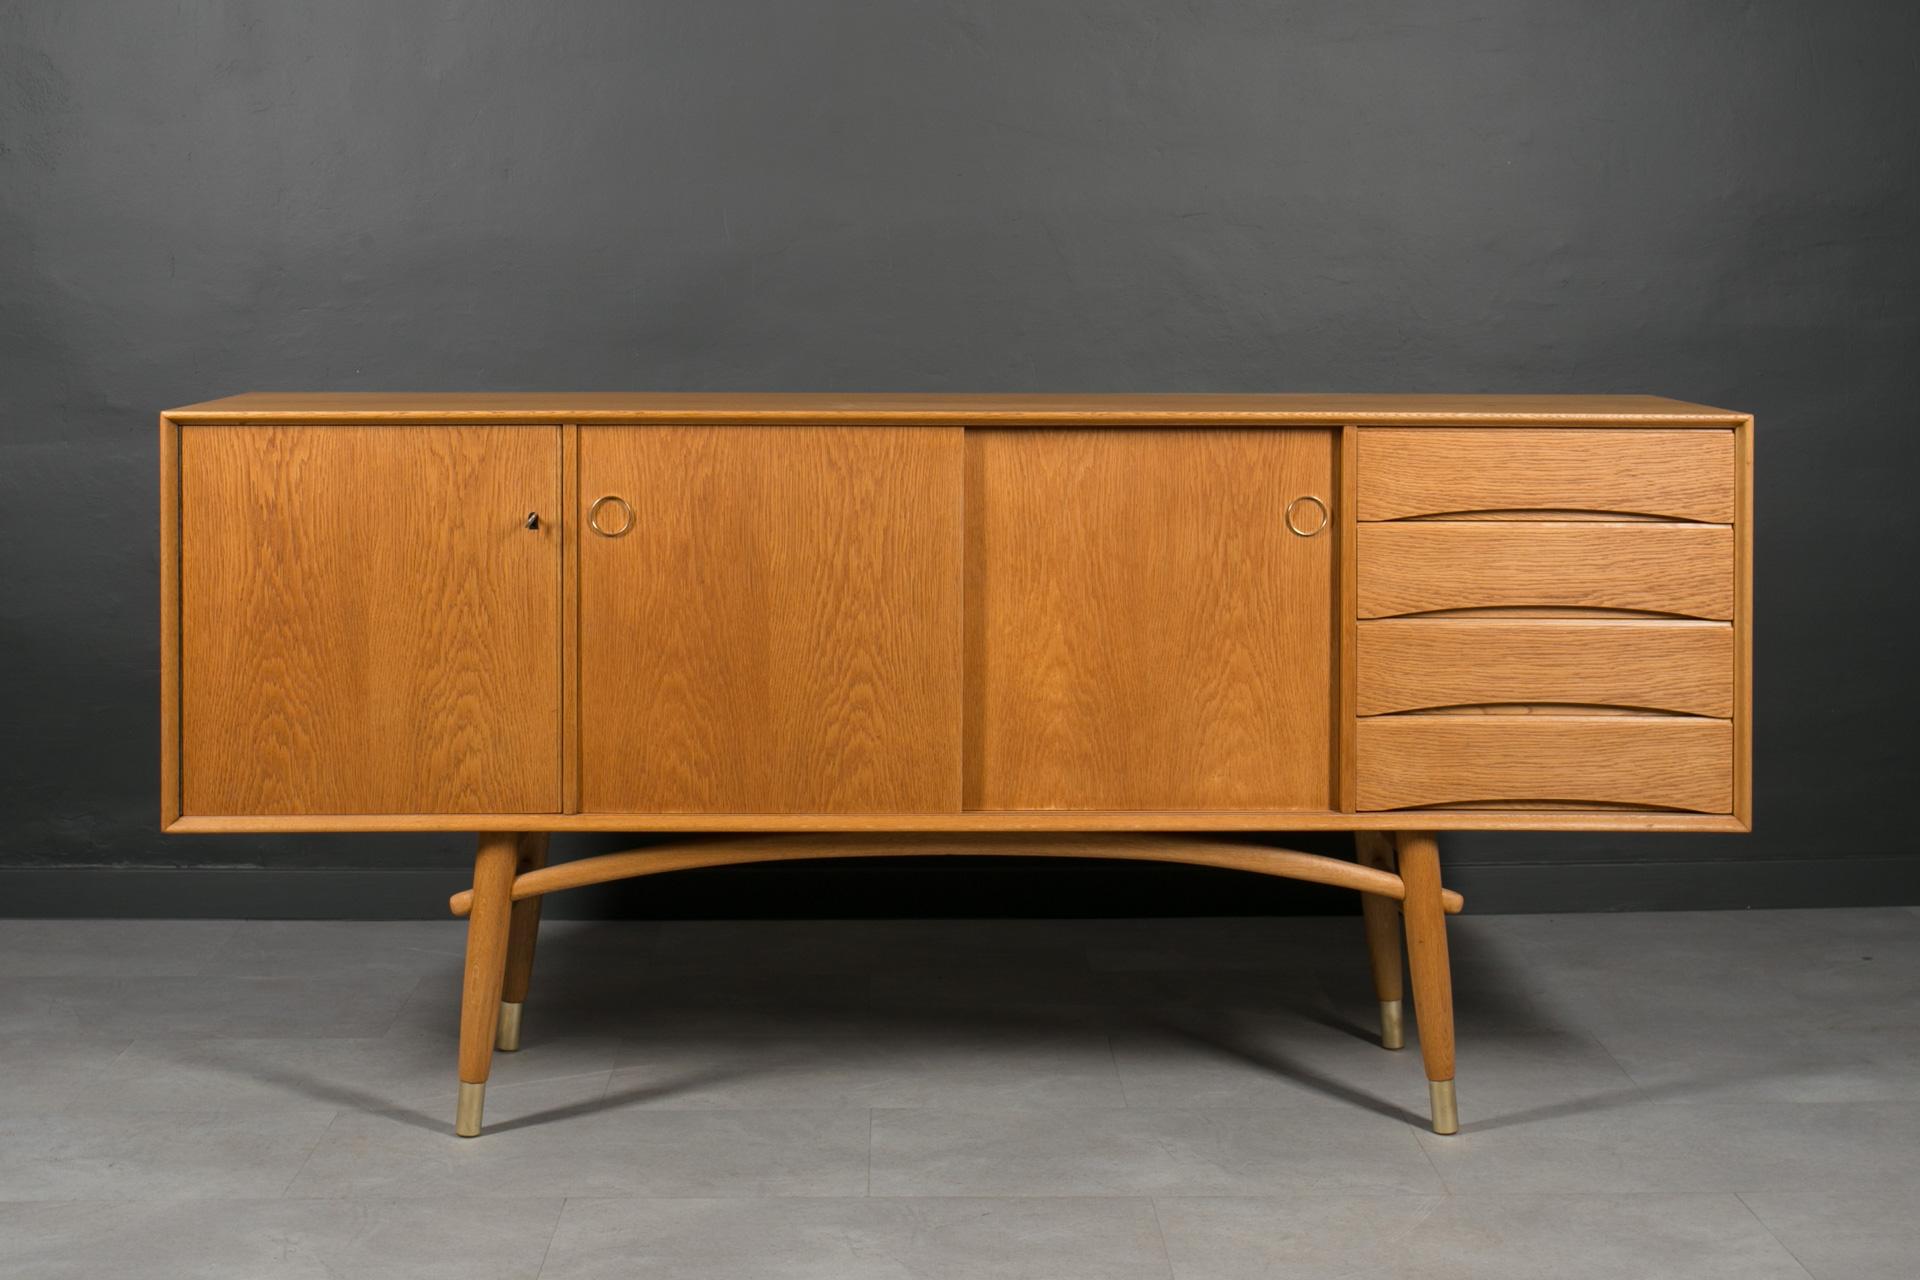 This exquisite sideboard is a true masterpiece designed for Gustav Bahus Furniture manufacture around 1950s. This extraordinary piece seamlessly blends beautiful Scandinavian design and function, making it a must-have for discerning connoisseurs.